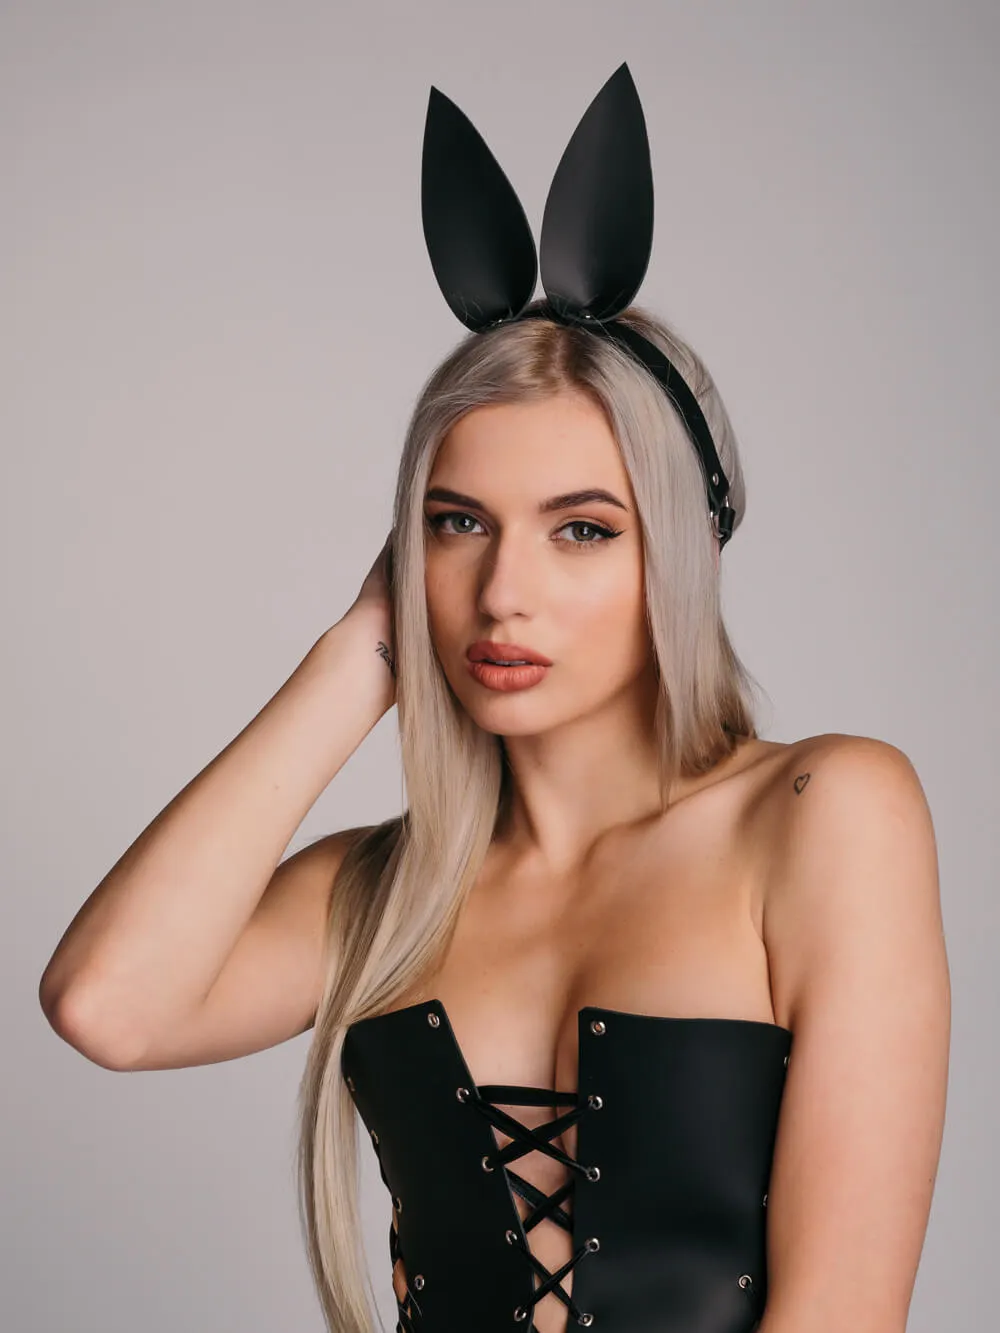 Erotic leather tiara with rabbit ears. Halloween, BDSM and party carnival costume.